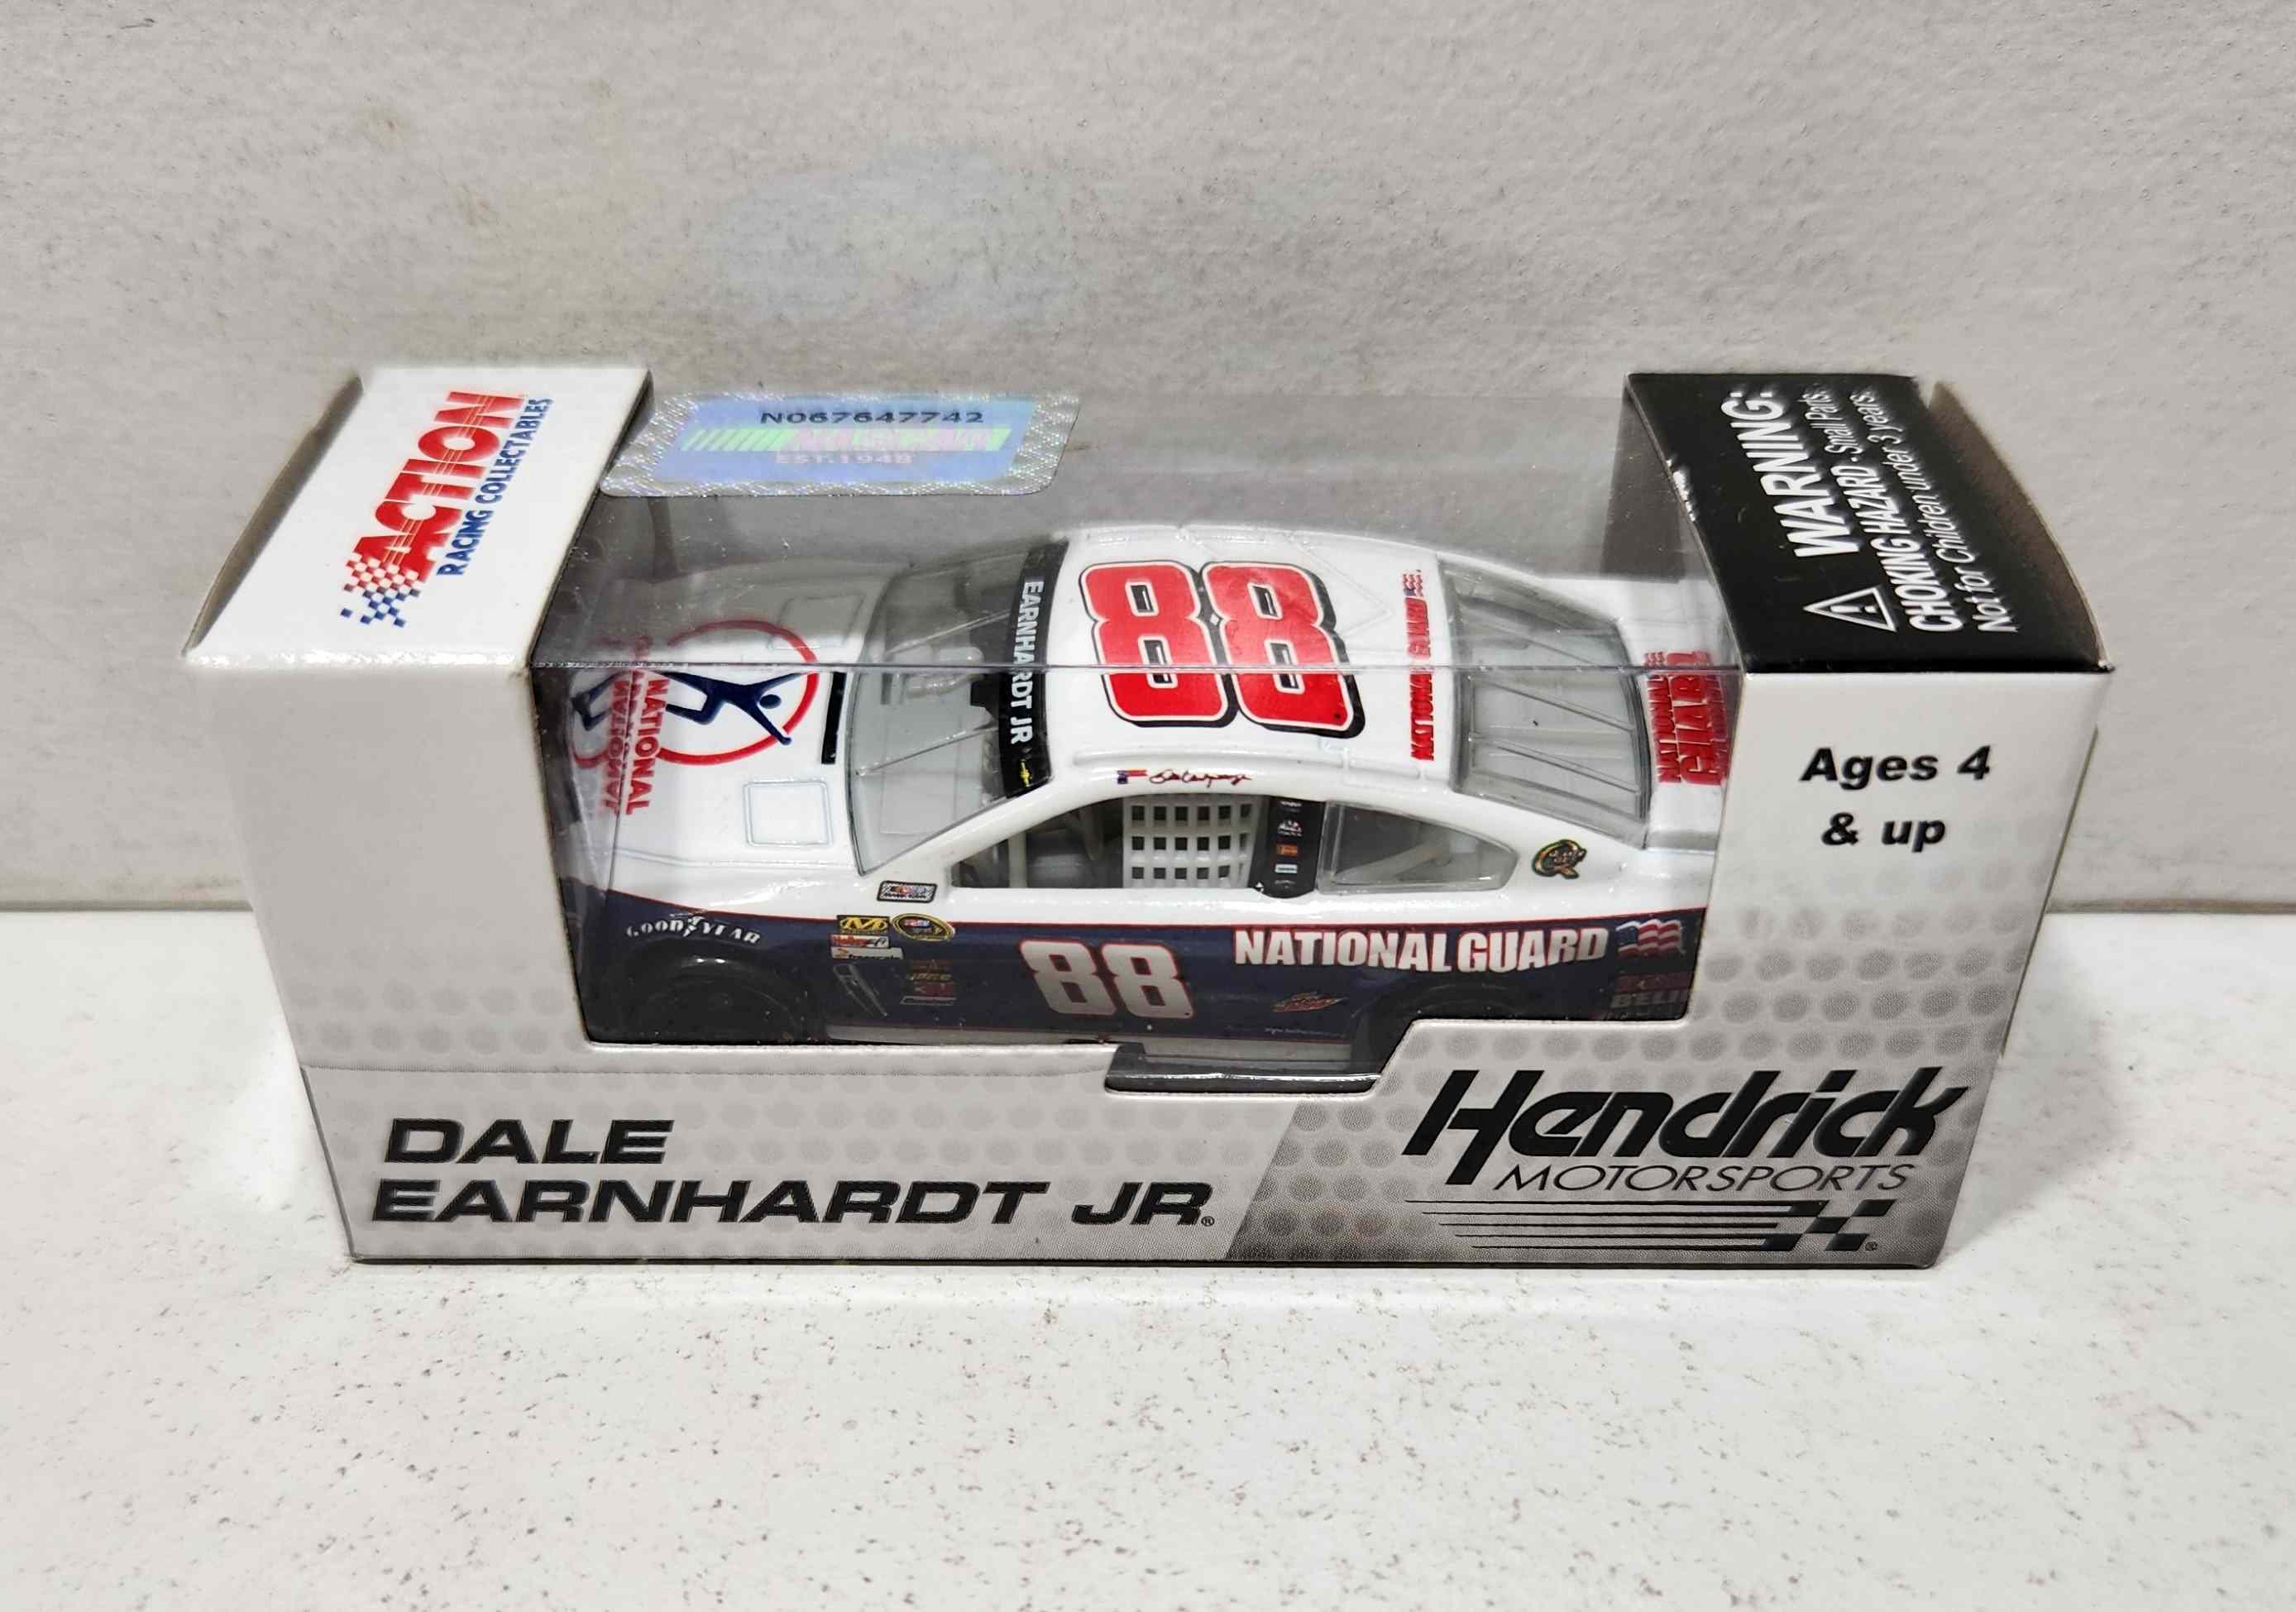 2013 Dale Earnhardt Jr 1/64th National Guard "Youth Foundation" Pitstop Series Chevrolet SS